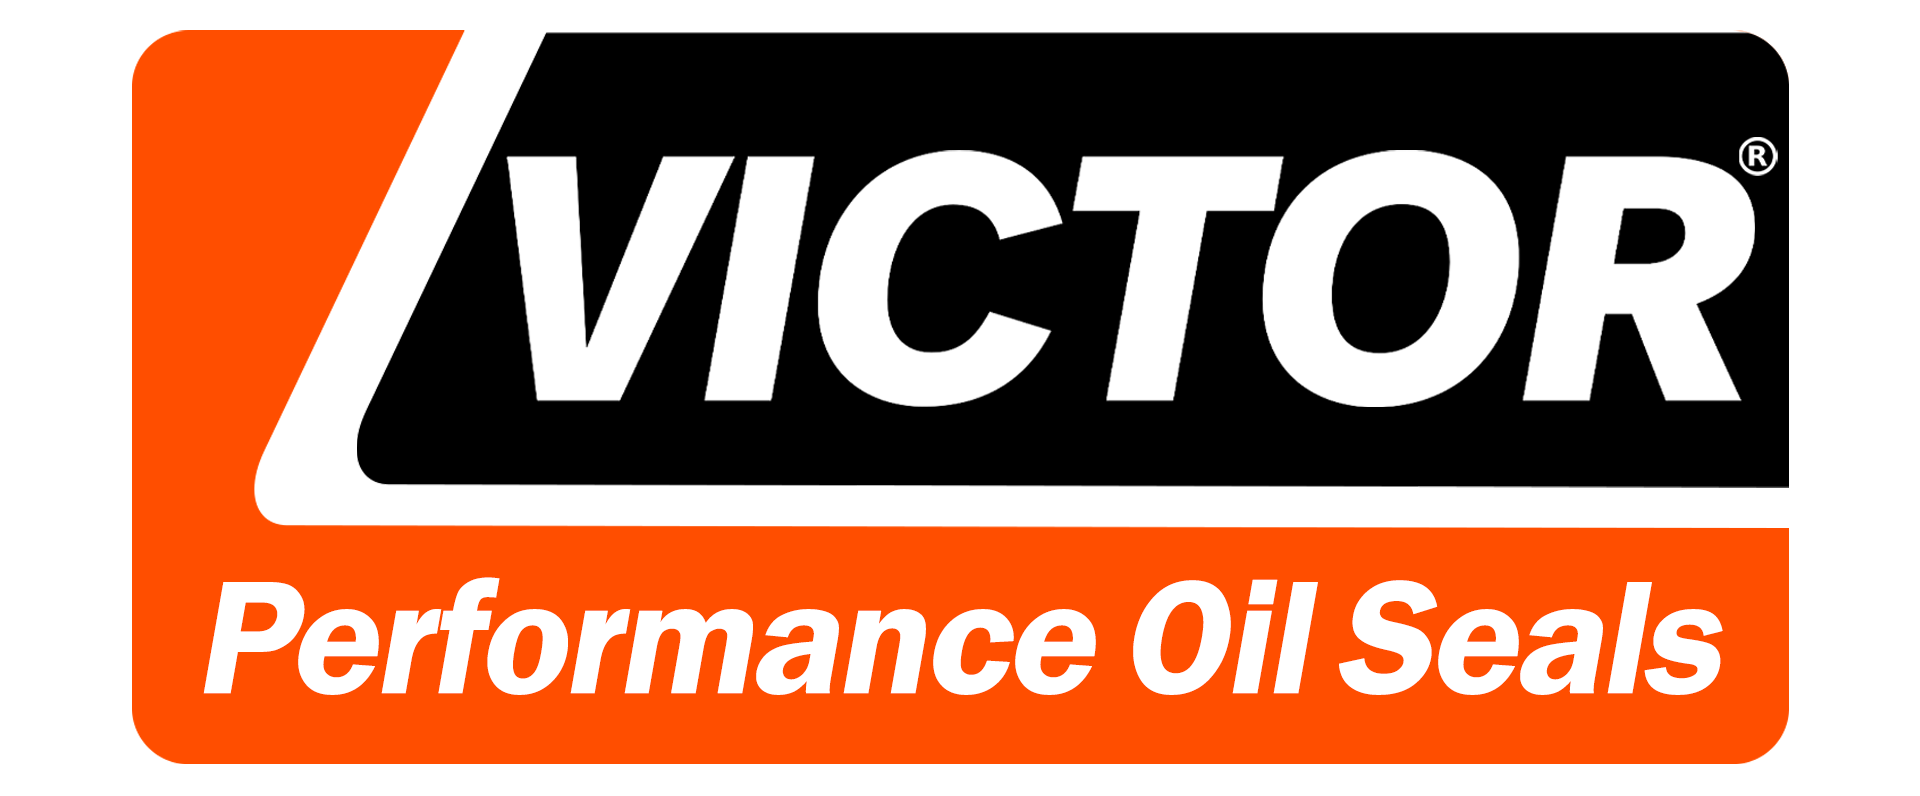 Victor Performance Oil Seals.png